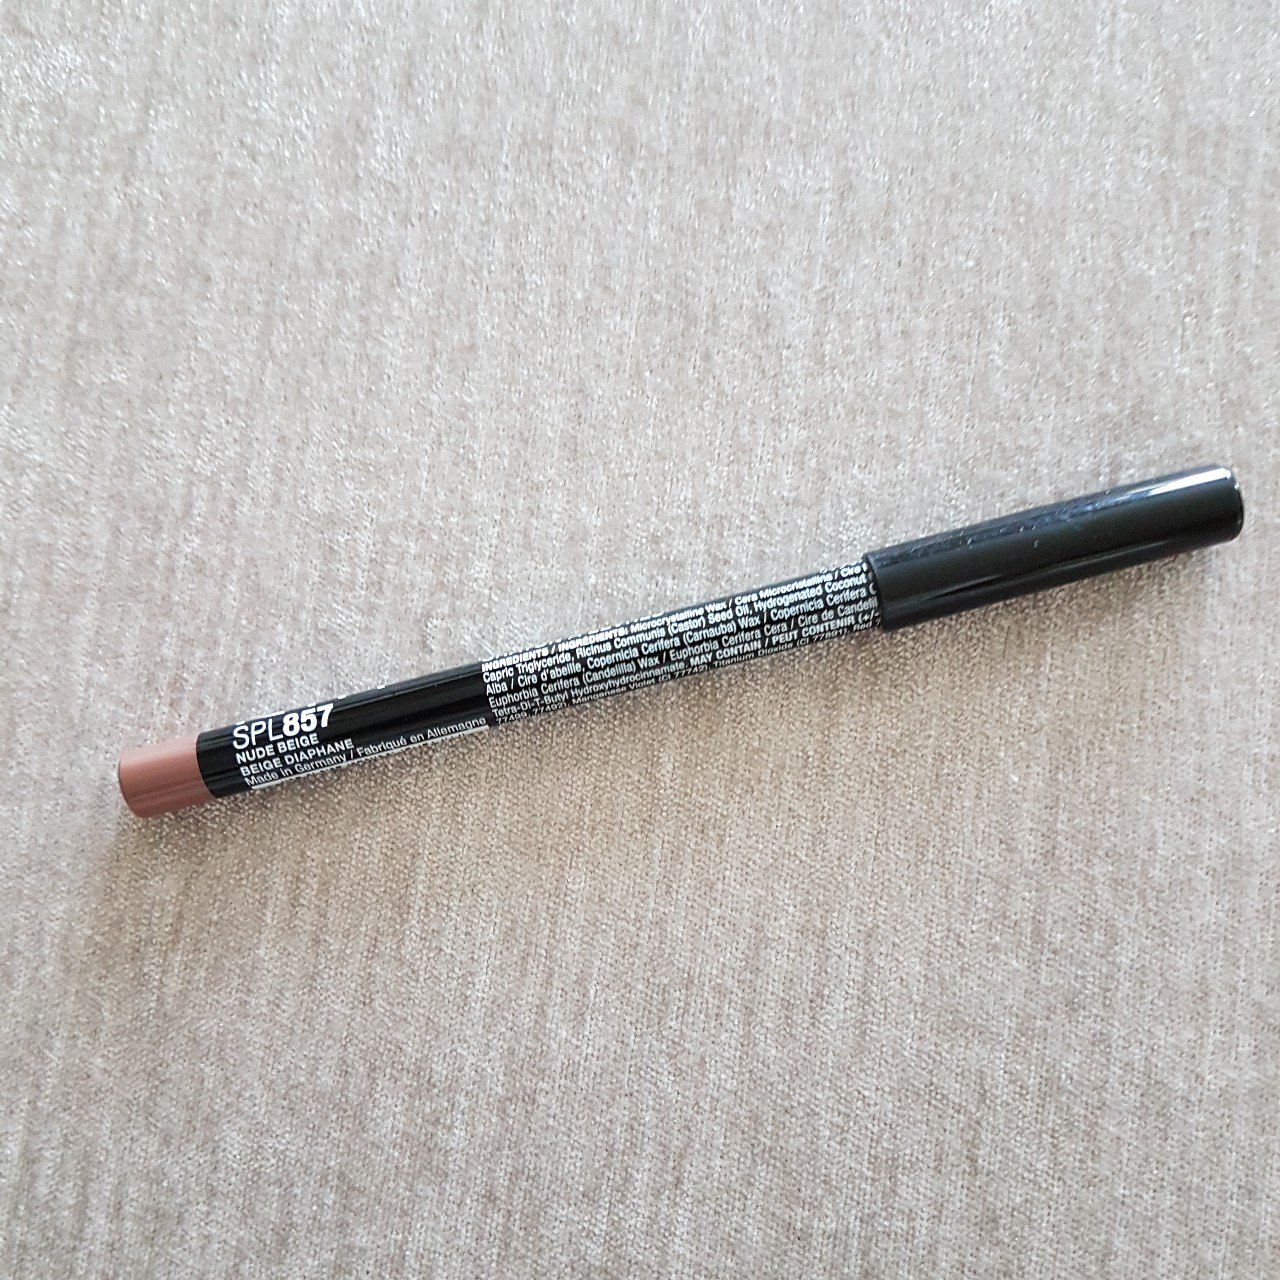 NYX lip liner in Nude Beige. Dupe for MAC Stripdown FREE shipping